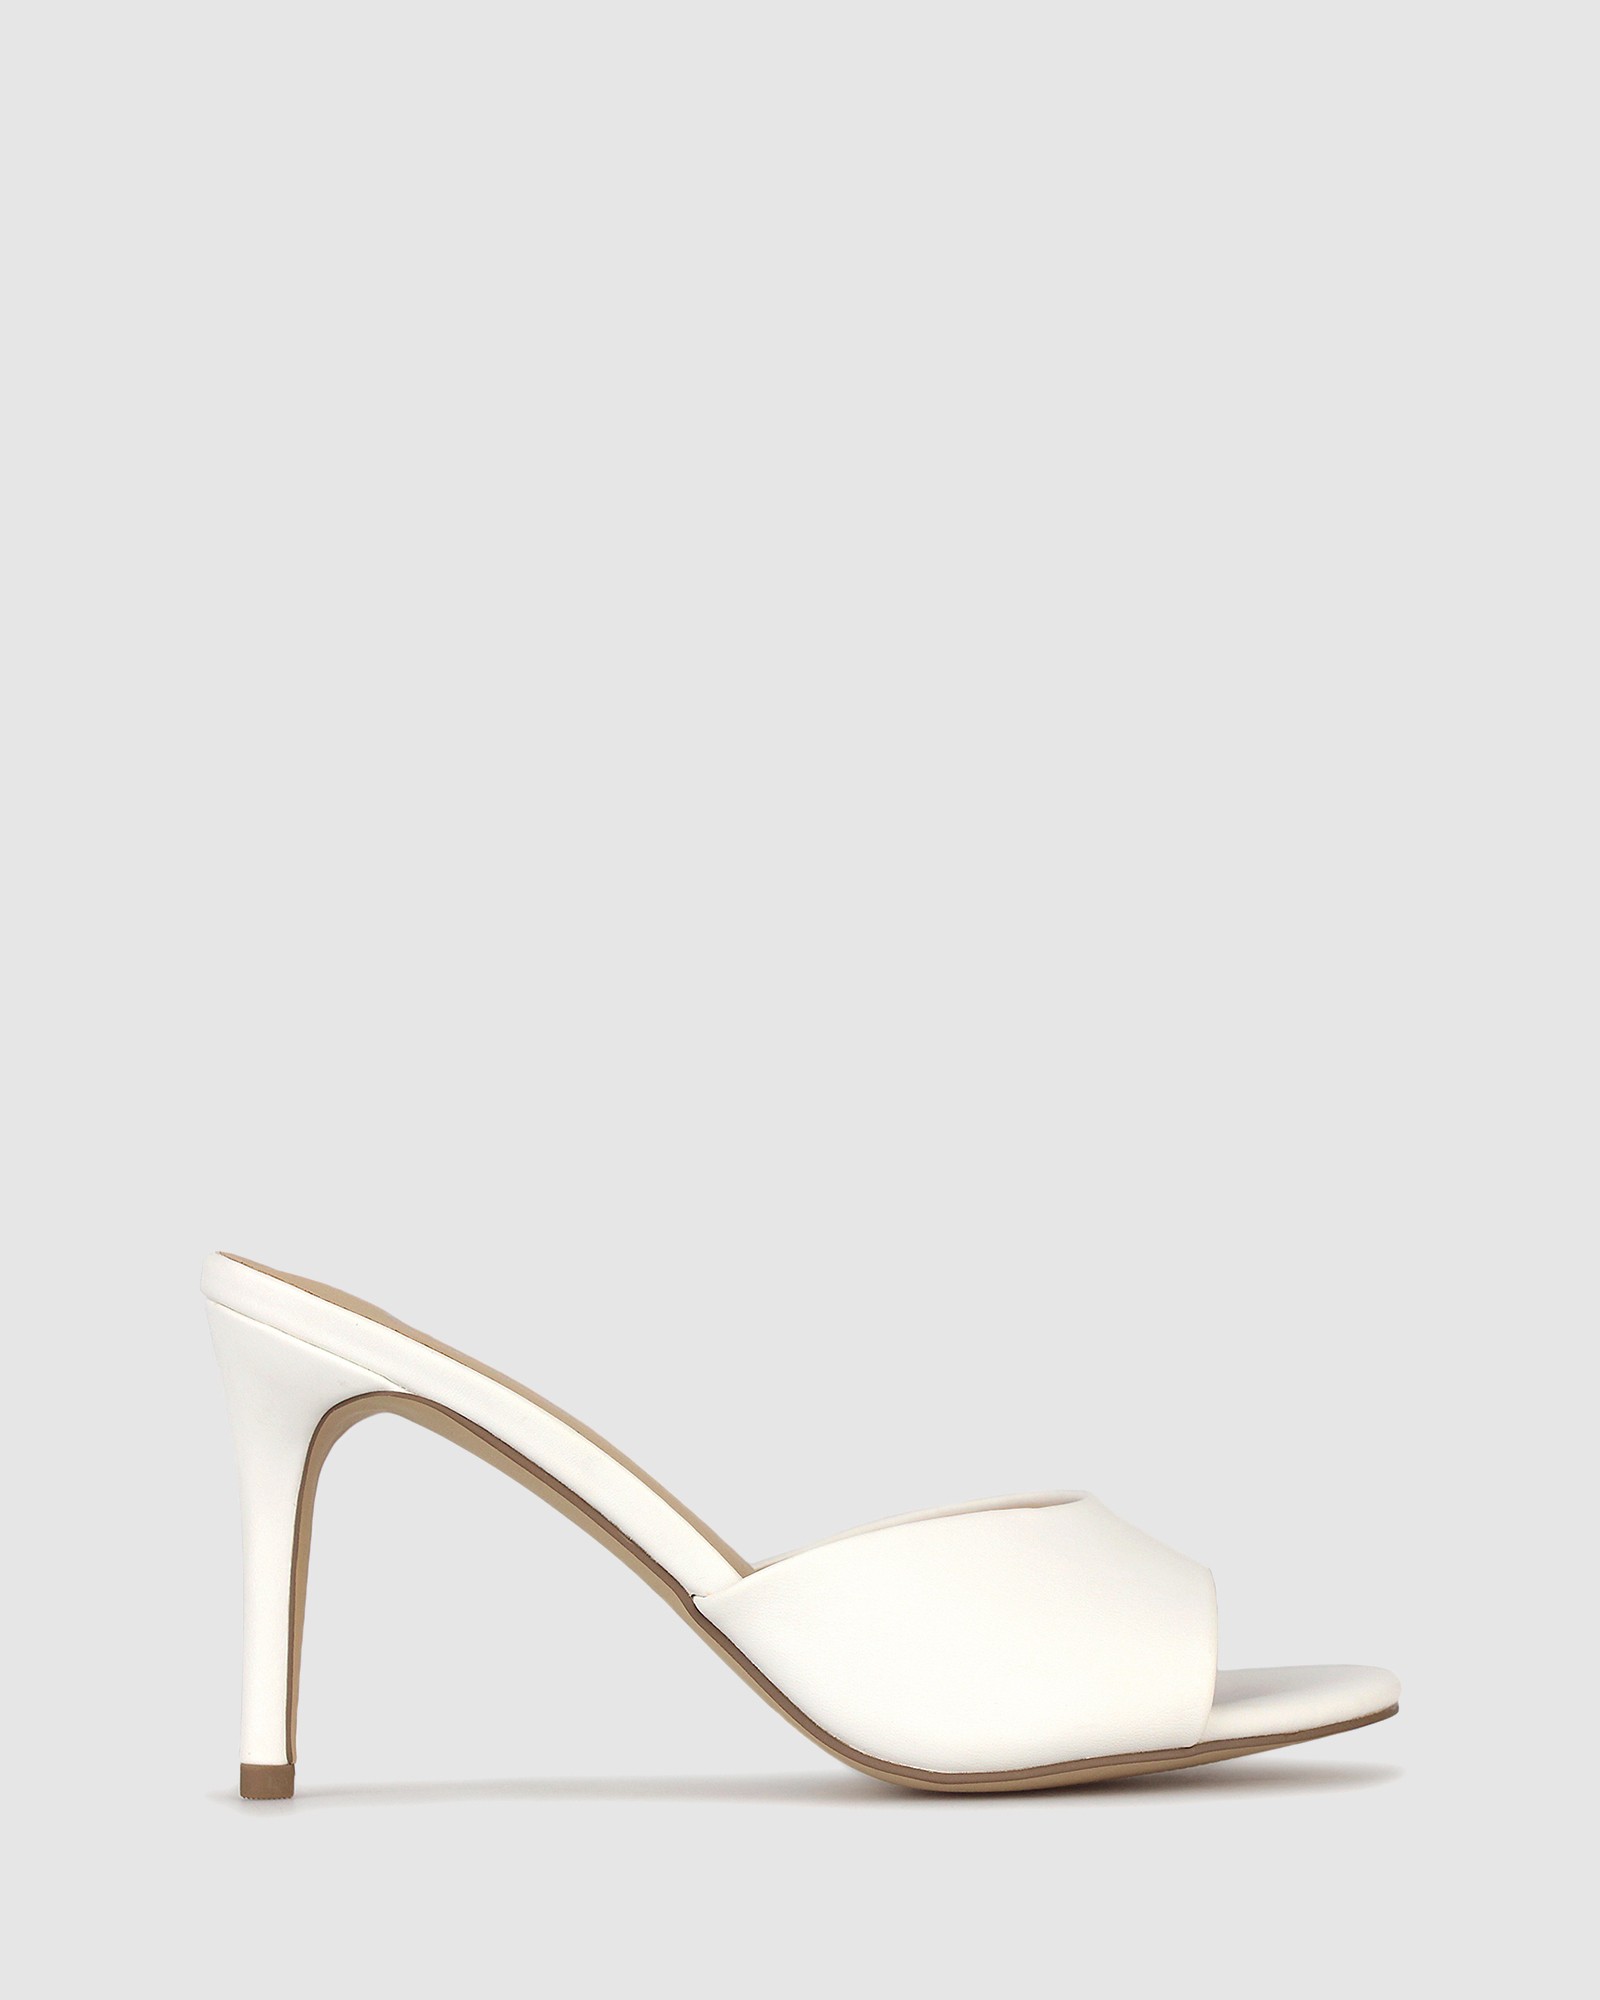 Sly Stiletto Heel Mules White by Betts | ShoeSales